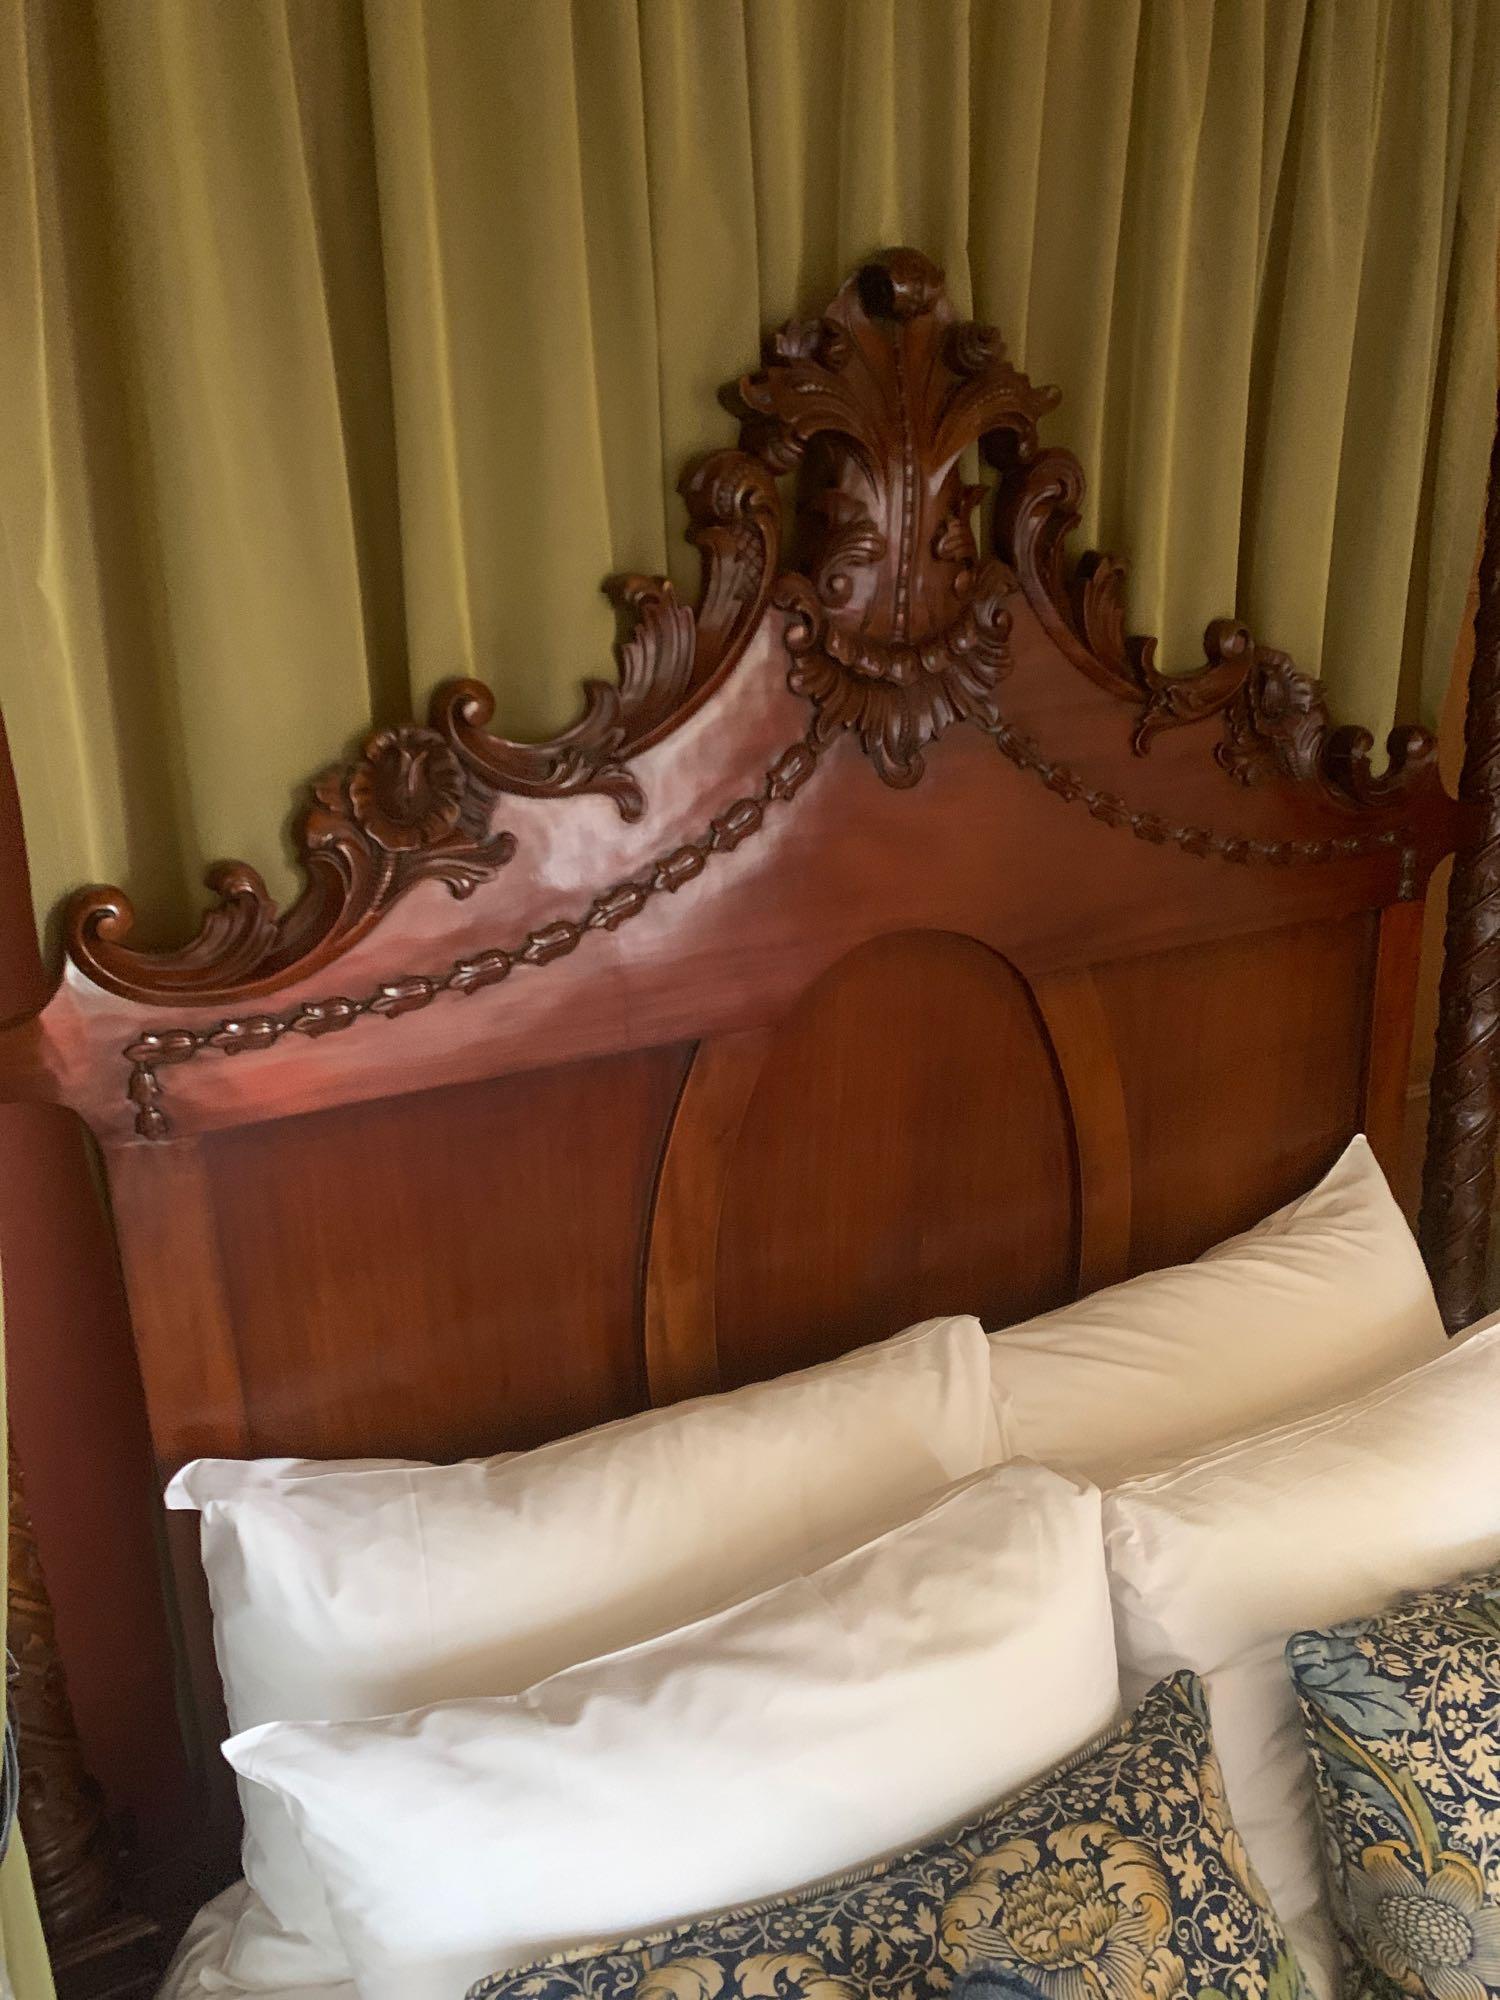 Mahogany Carved 4 Poster Bed Complete With Canopy Antique French Style Bed With Dressed Column Posts - Image 5 of 5